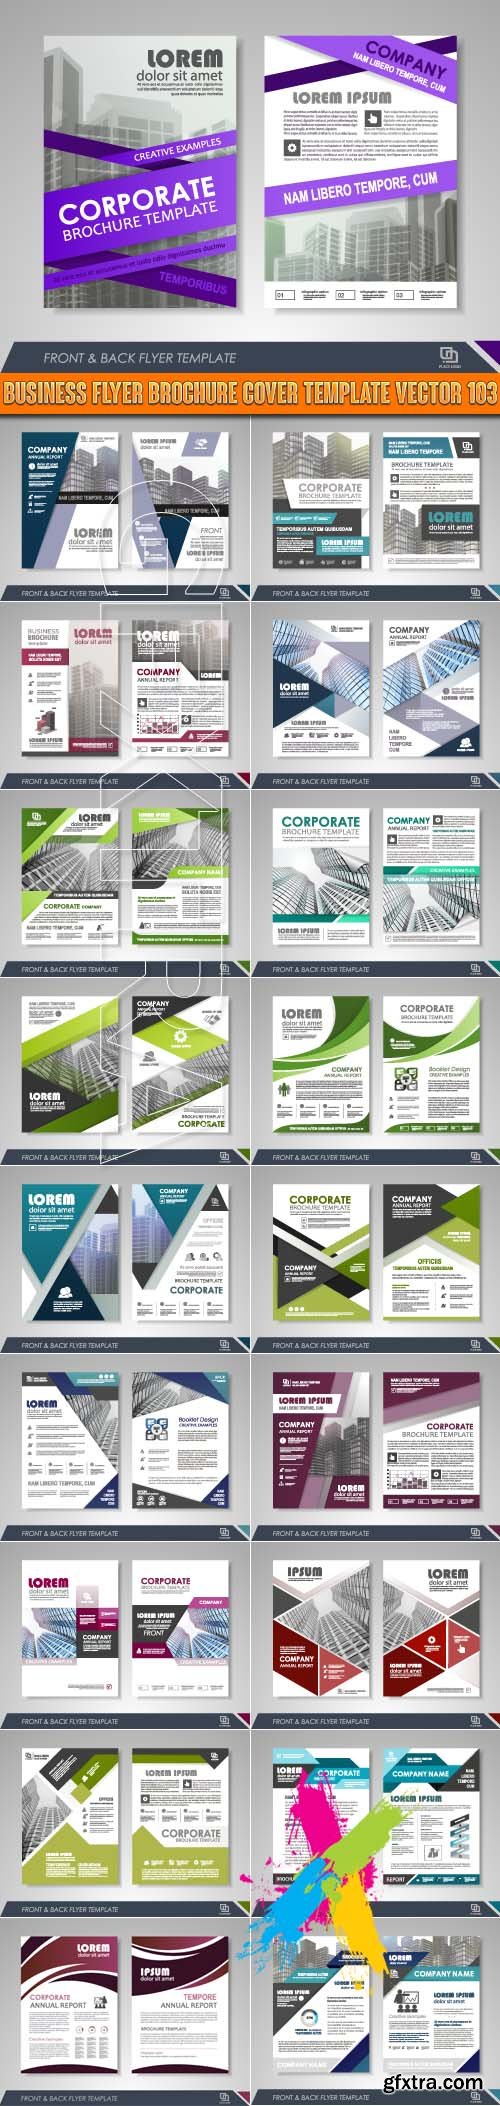 Business flyer brochure cover template vector 103